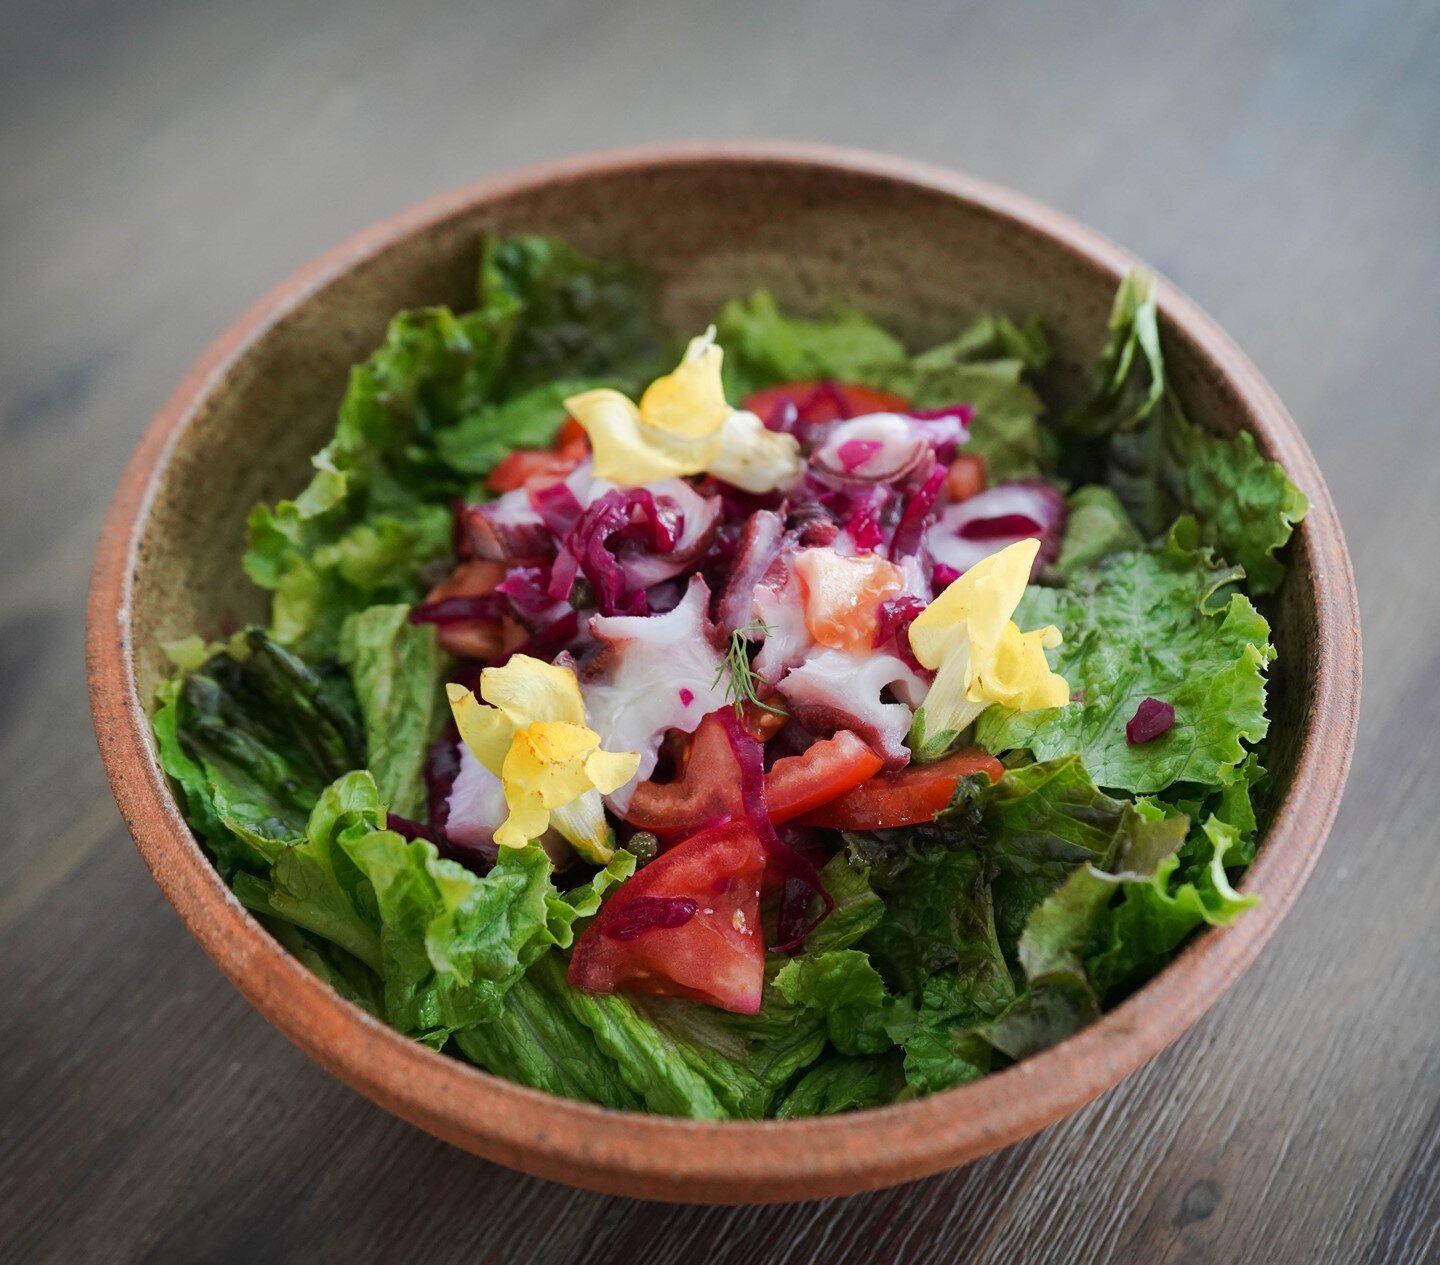 This octopus salad is among our favorite summer salad recipes.⁠
⁠
RECIPE ➡️⁠
https://hakko.online/blog/2021/7/20/shio-koji-octopus-marina-salad⁠
⁠
⁠
#hakko #hakko.online #fermentation #shiokoji #koji⁠
#octopus #octopussalad #boiledoctopus #healthyeat